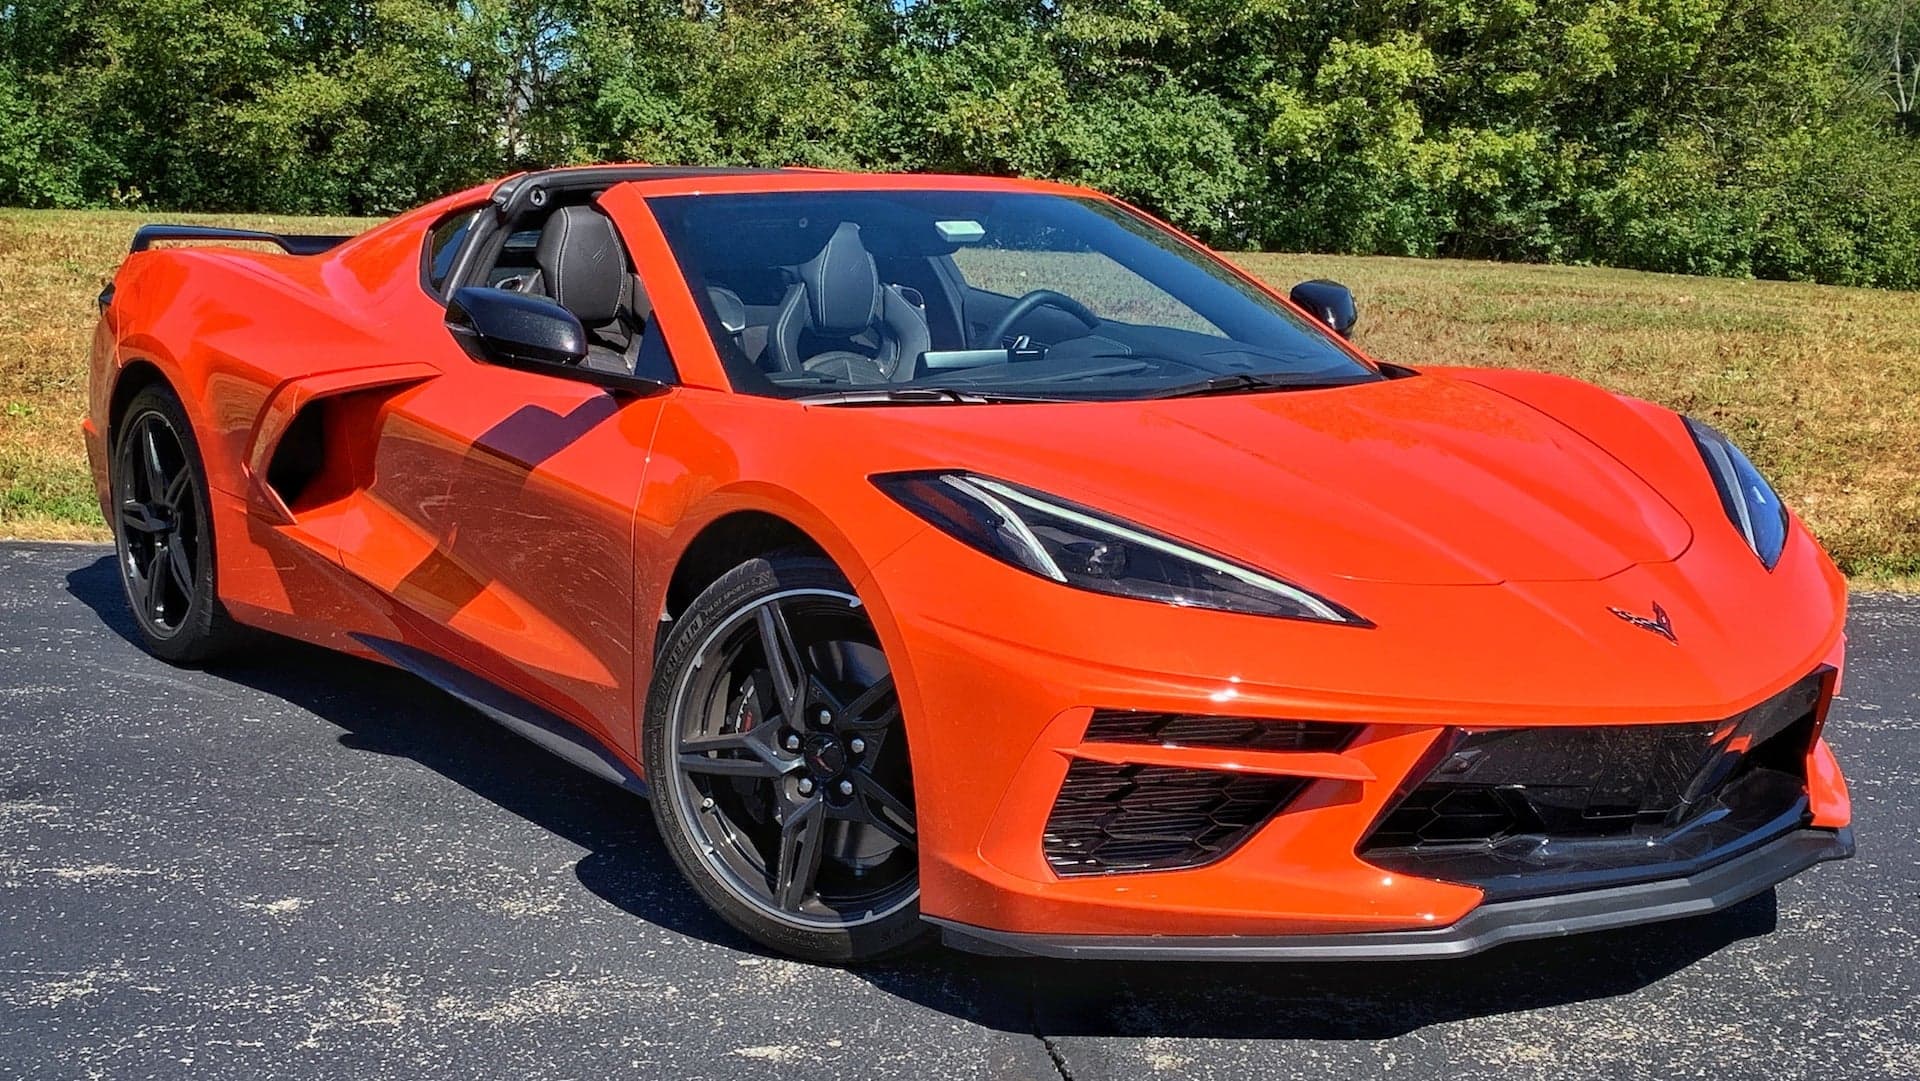 I’m Going to Daily-Drive a 2020 Chevy Corvette Stingray. What Do You Want to Know About It?